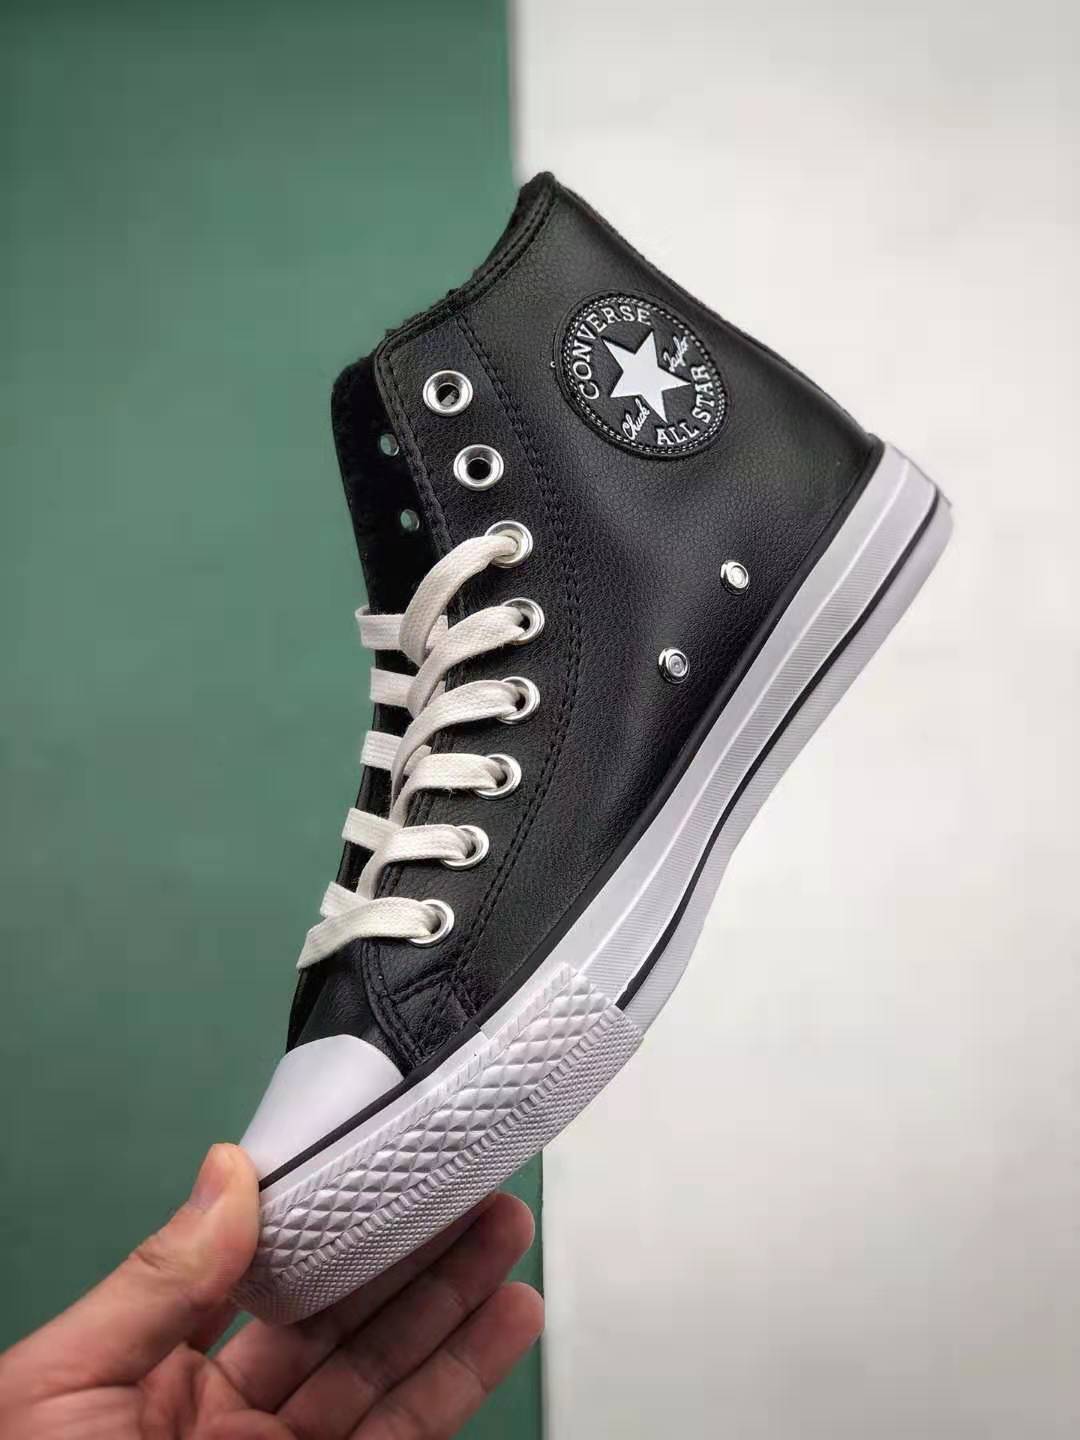 Converse Chuck Taylor All Star 154134C: Classic High-top Sneakers